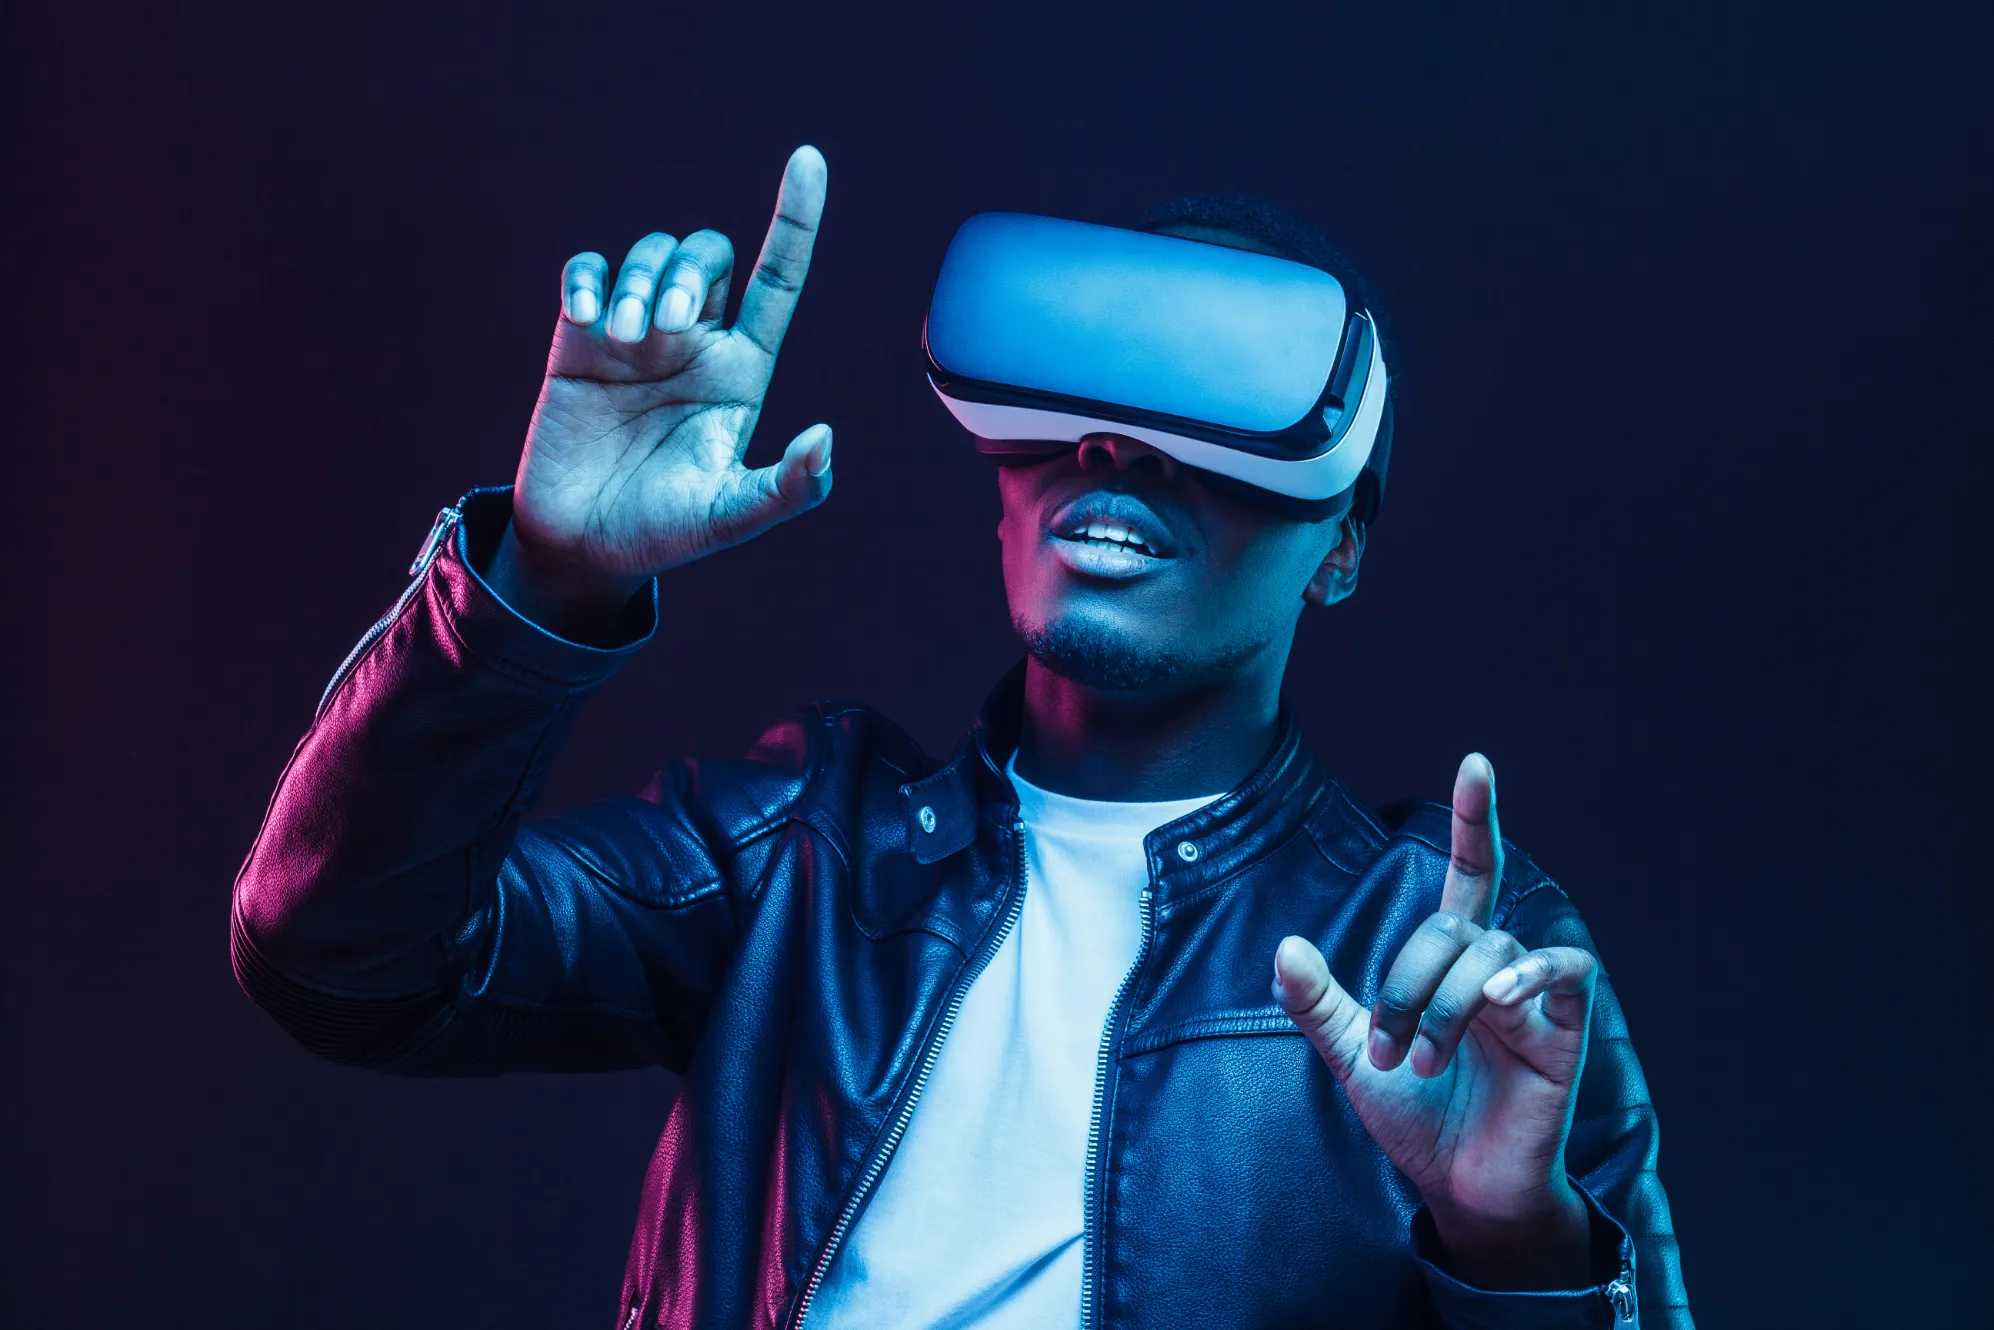 Stock Display Technological Advancements: VR Headset.